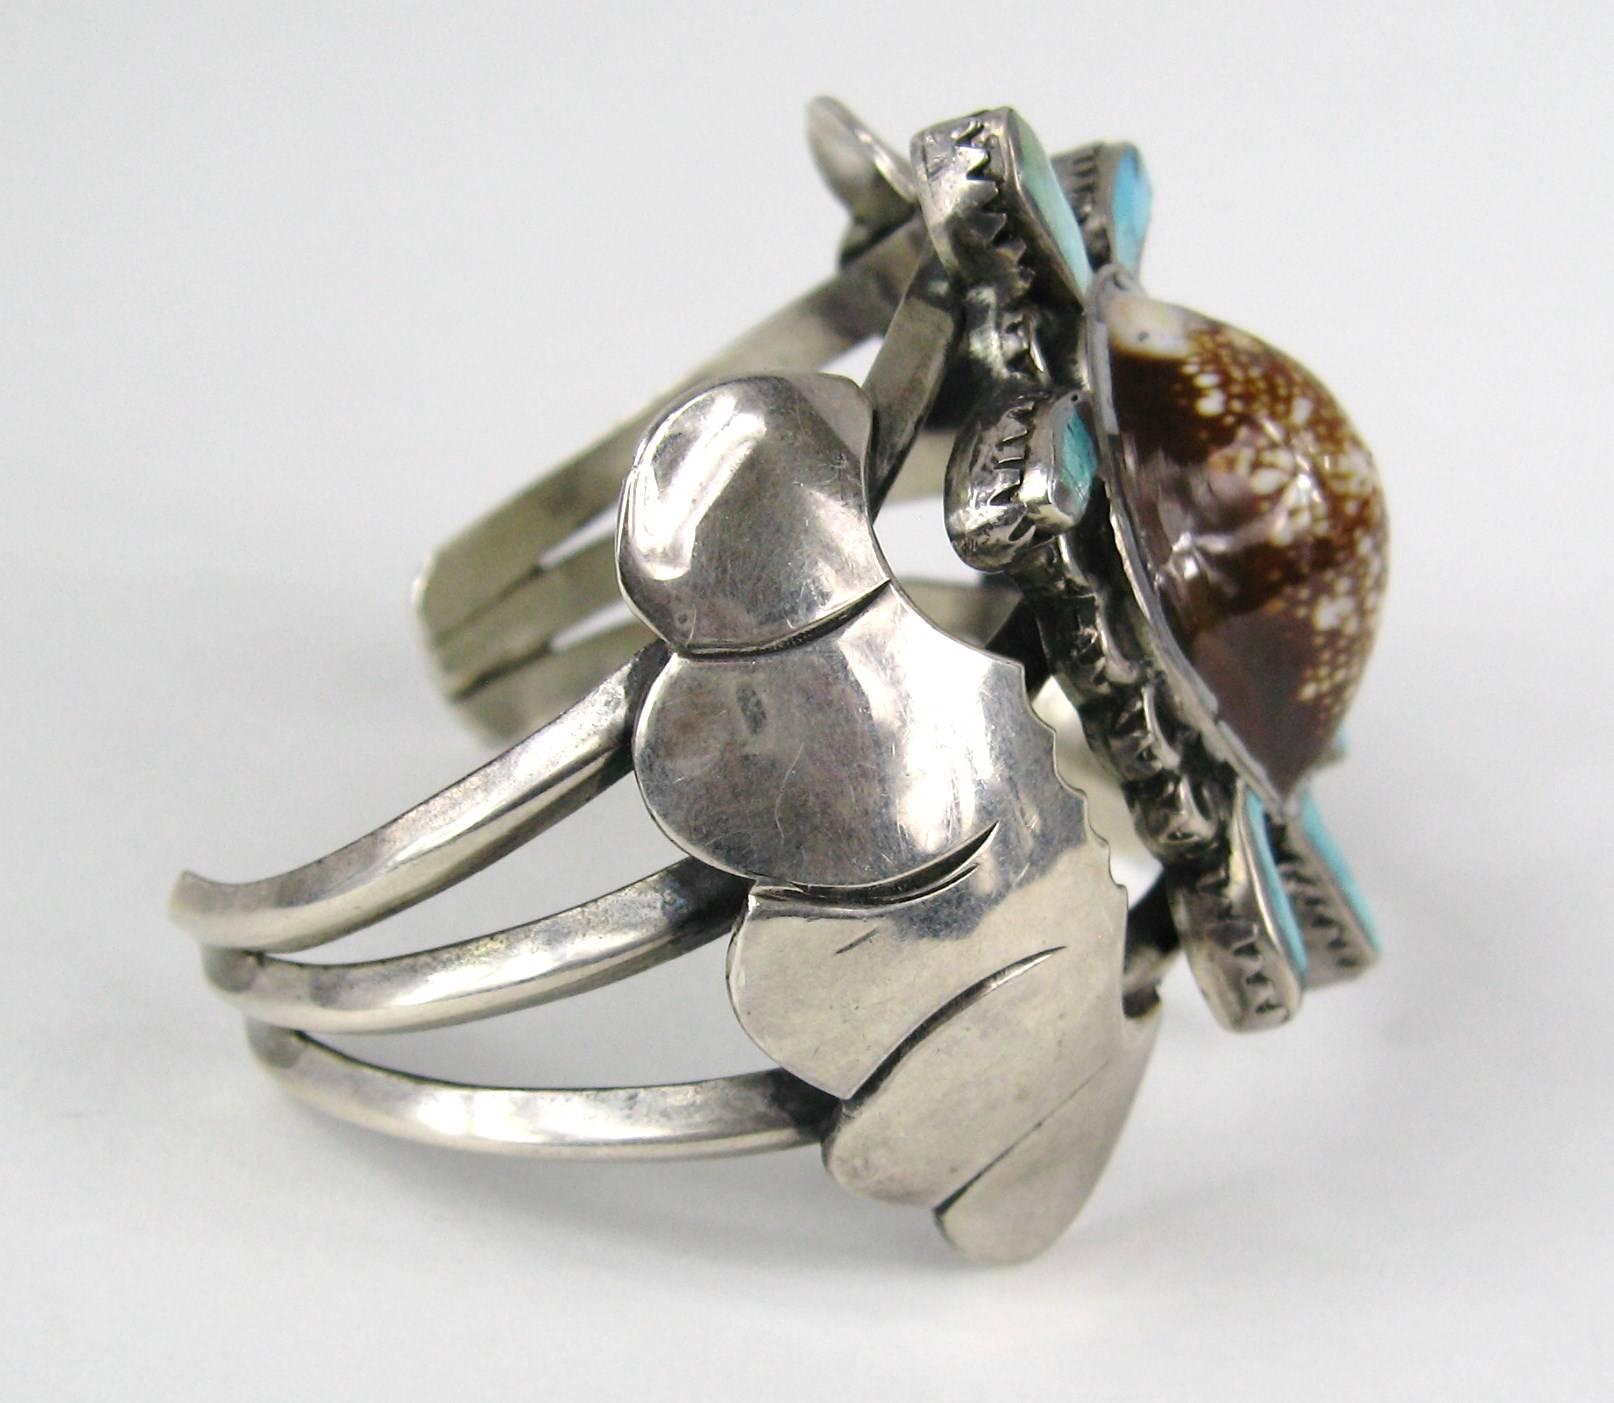 Hand wrought Sterling Silver Navajo Turtle Bracelet by E.A Zunie. Turtles body is Shell with Turquoise with a 3 Ring Bracelet surround. Matching Squash Blossom Necklace and Ring as well are on our storefront. Will Fit a 6.5in to 7.5in wrist. It is